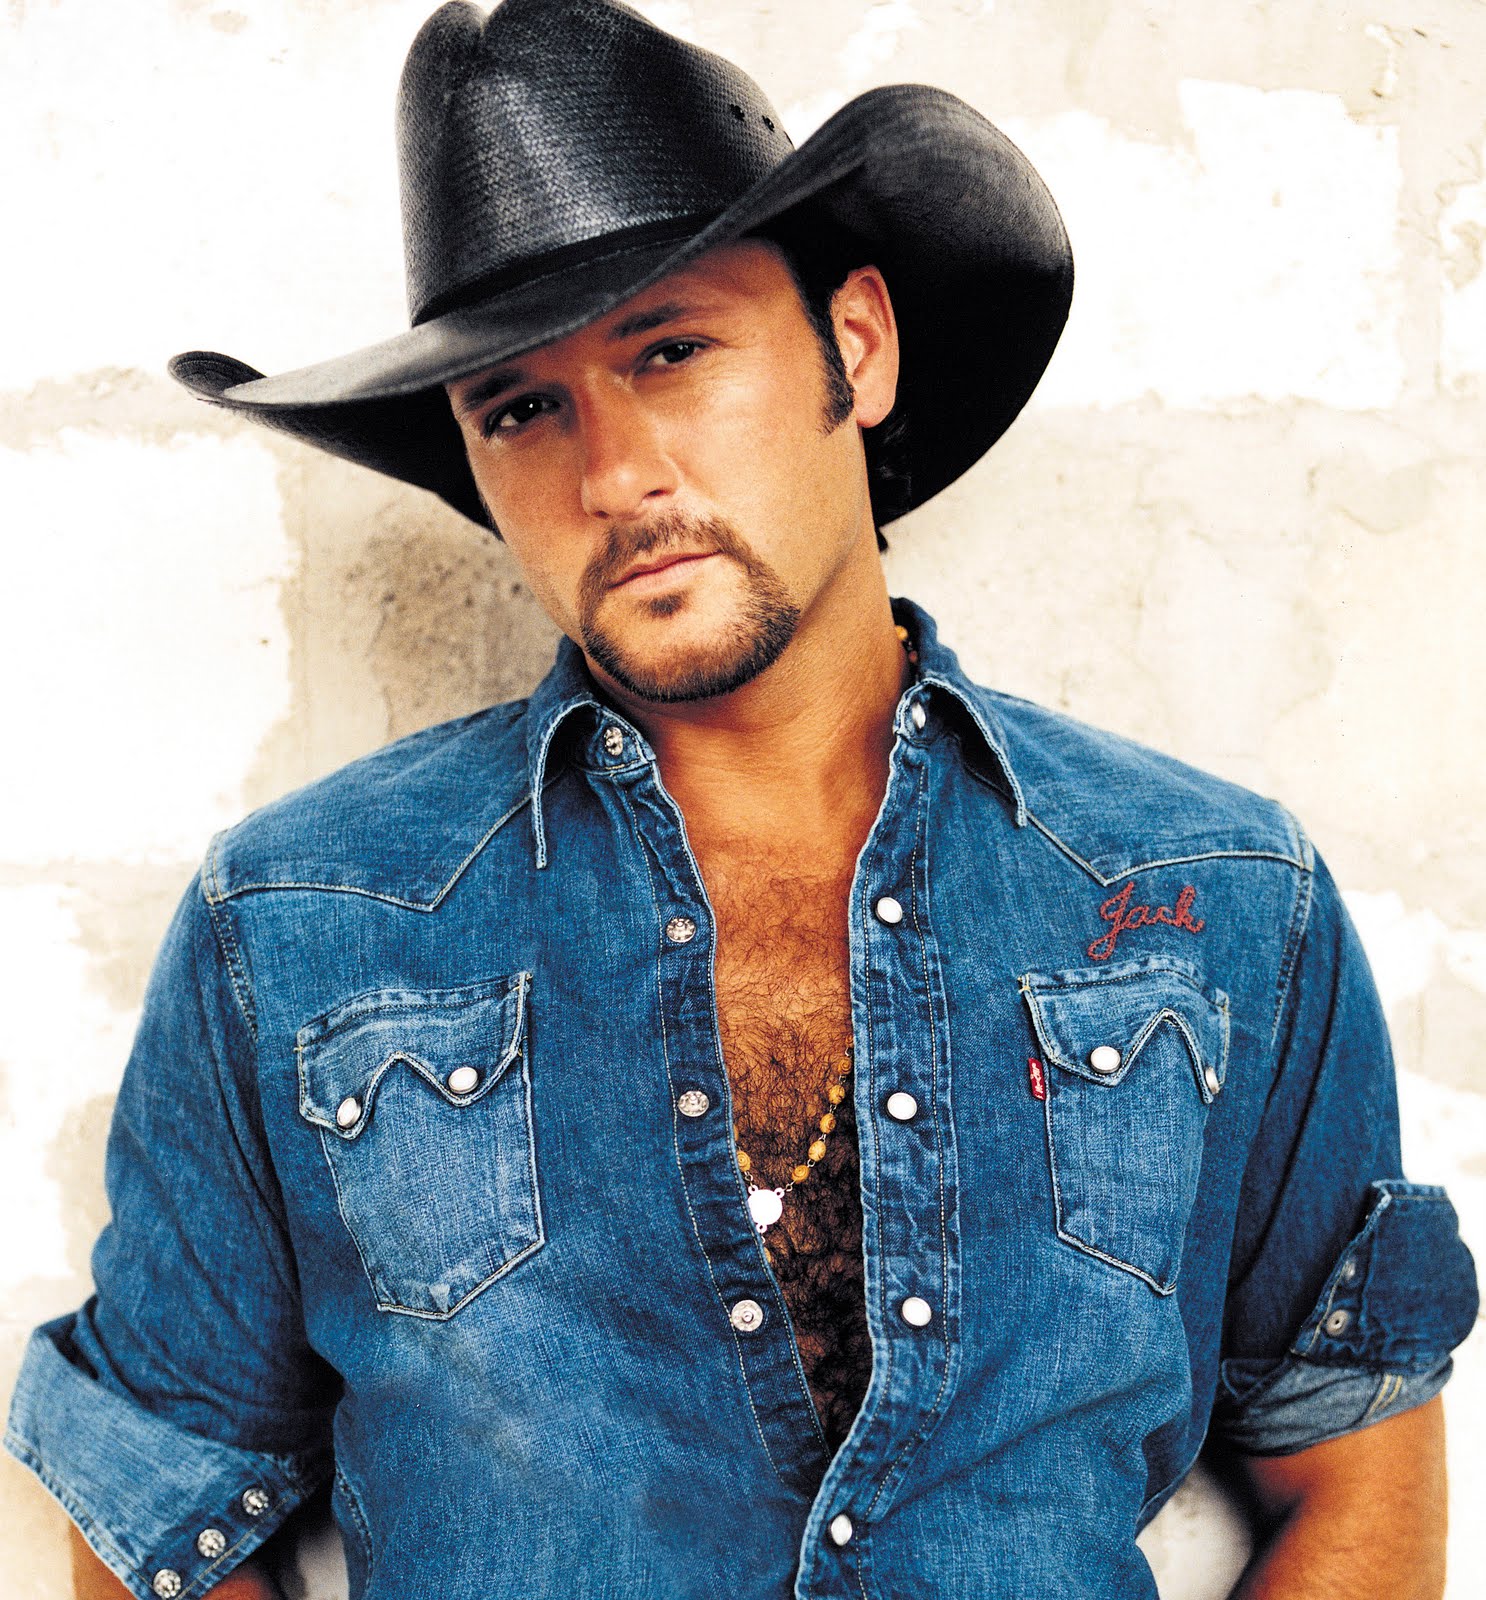 Male Celeb Fakes - Best of the Net: Tim McGraw American Country Singer